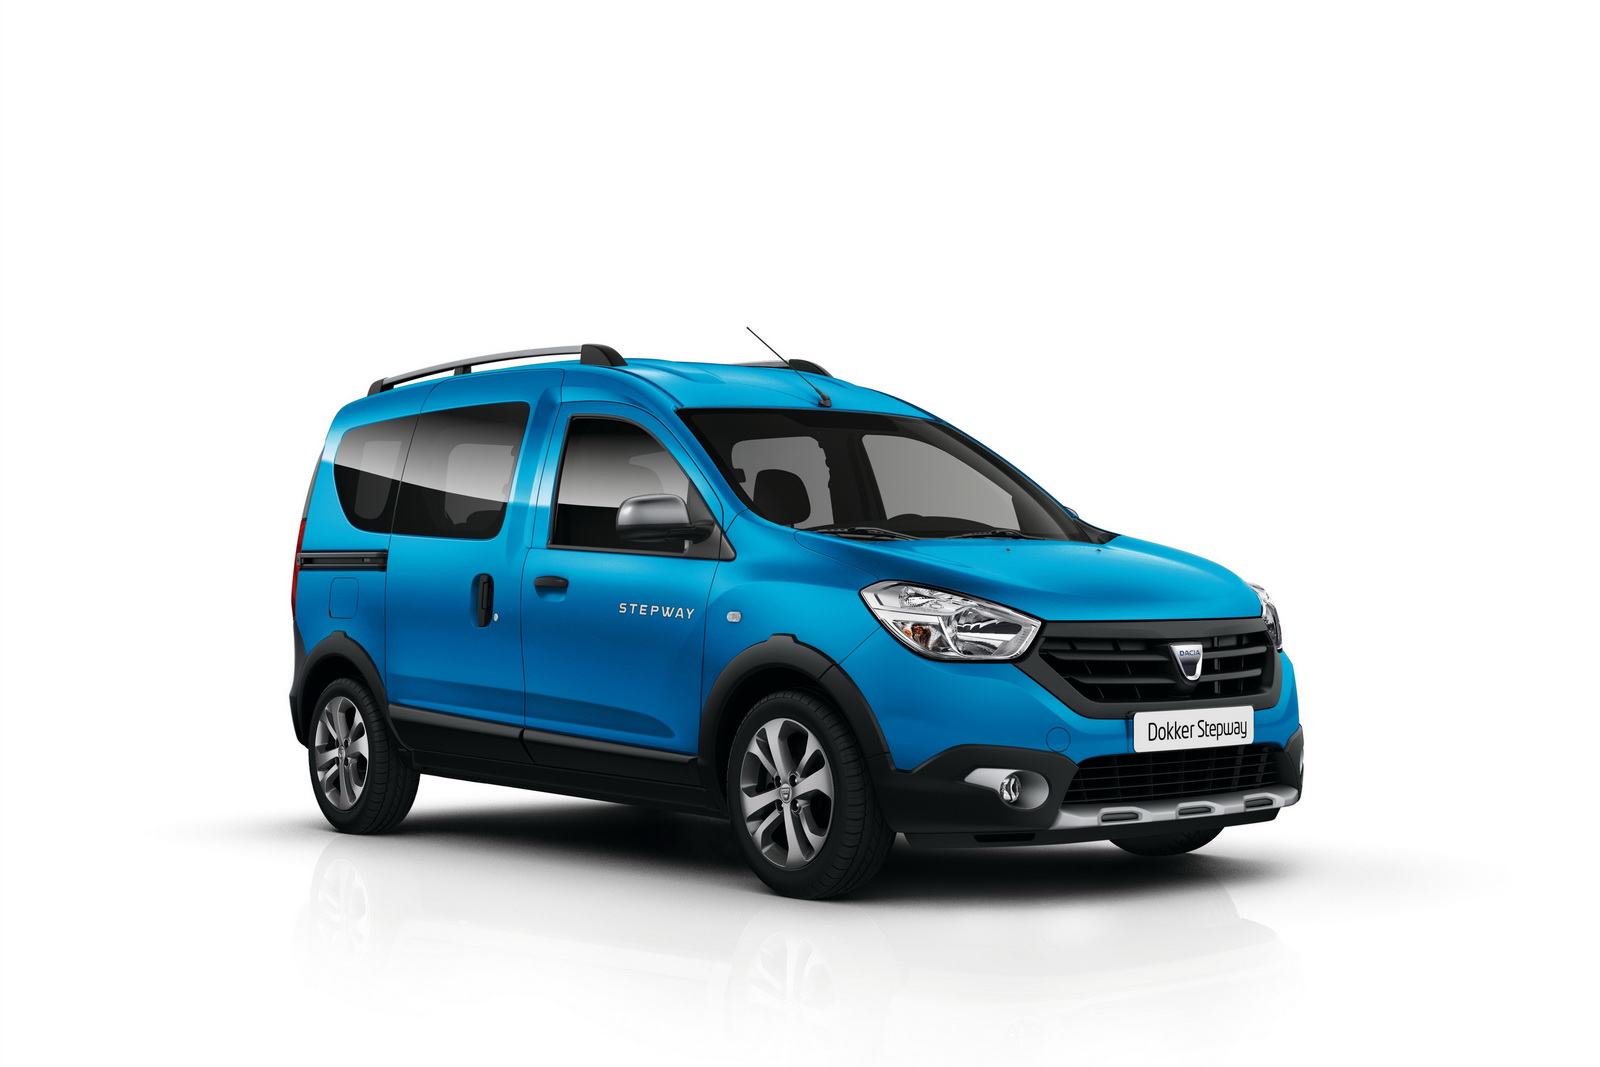 Facelifted Dacia Dokker And Lodgy Bring More Optional Features | Carscoops